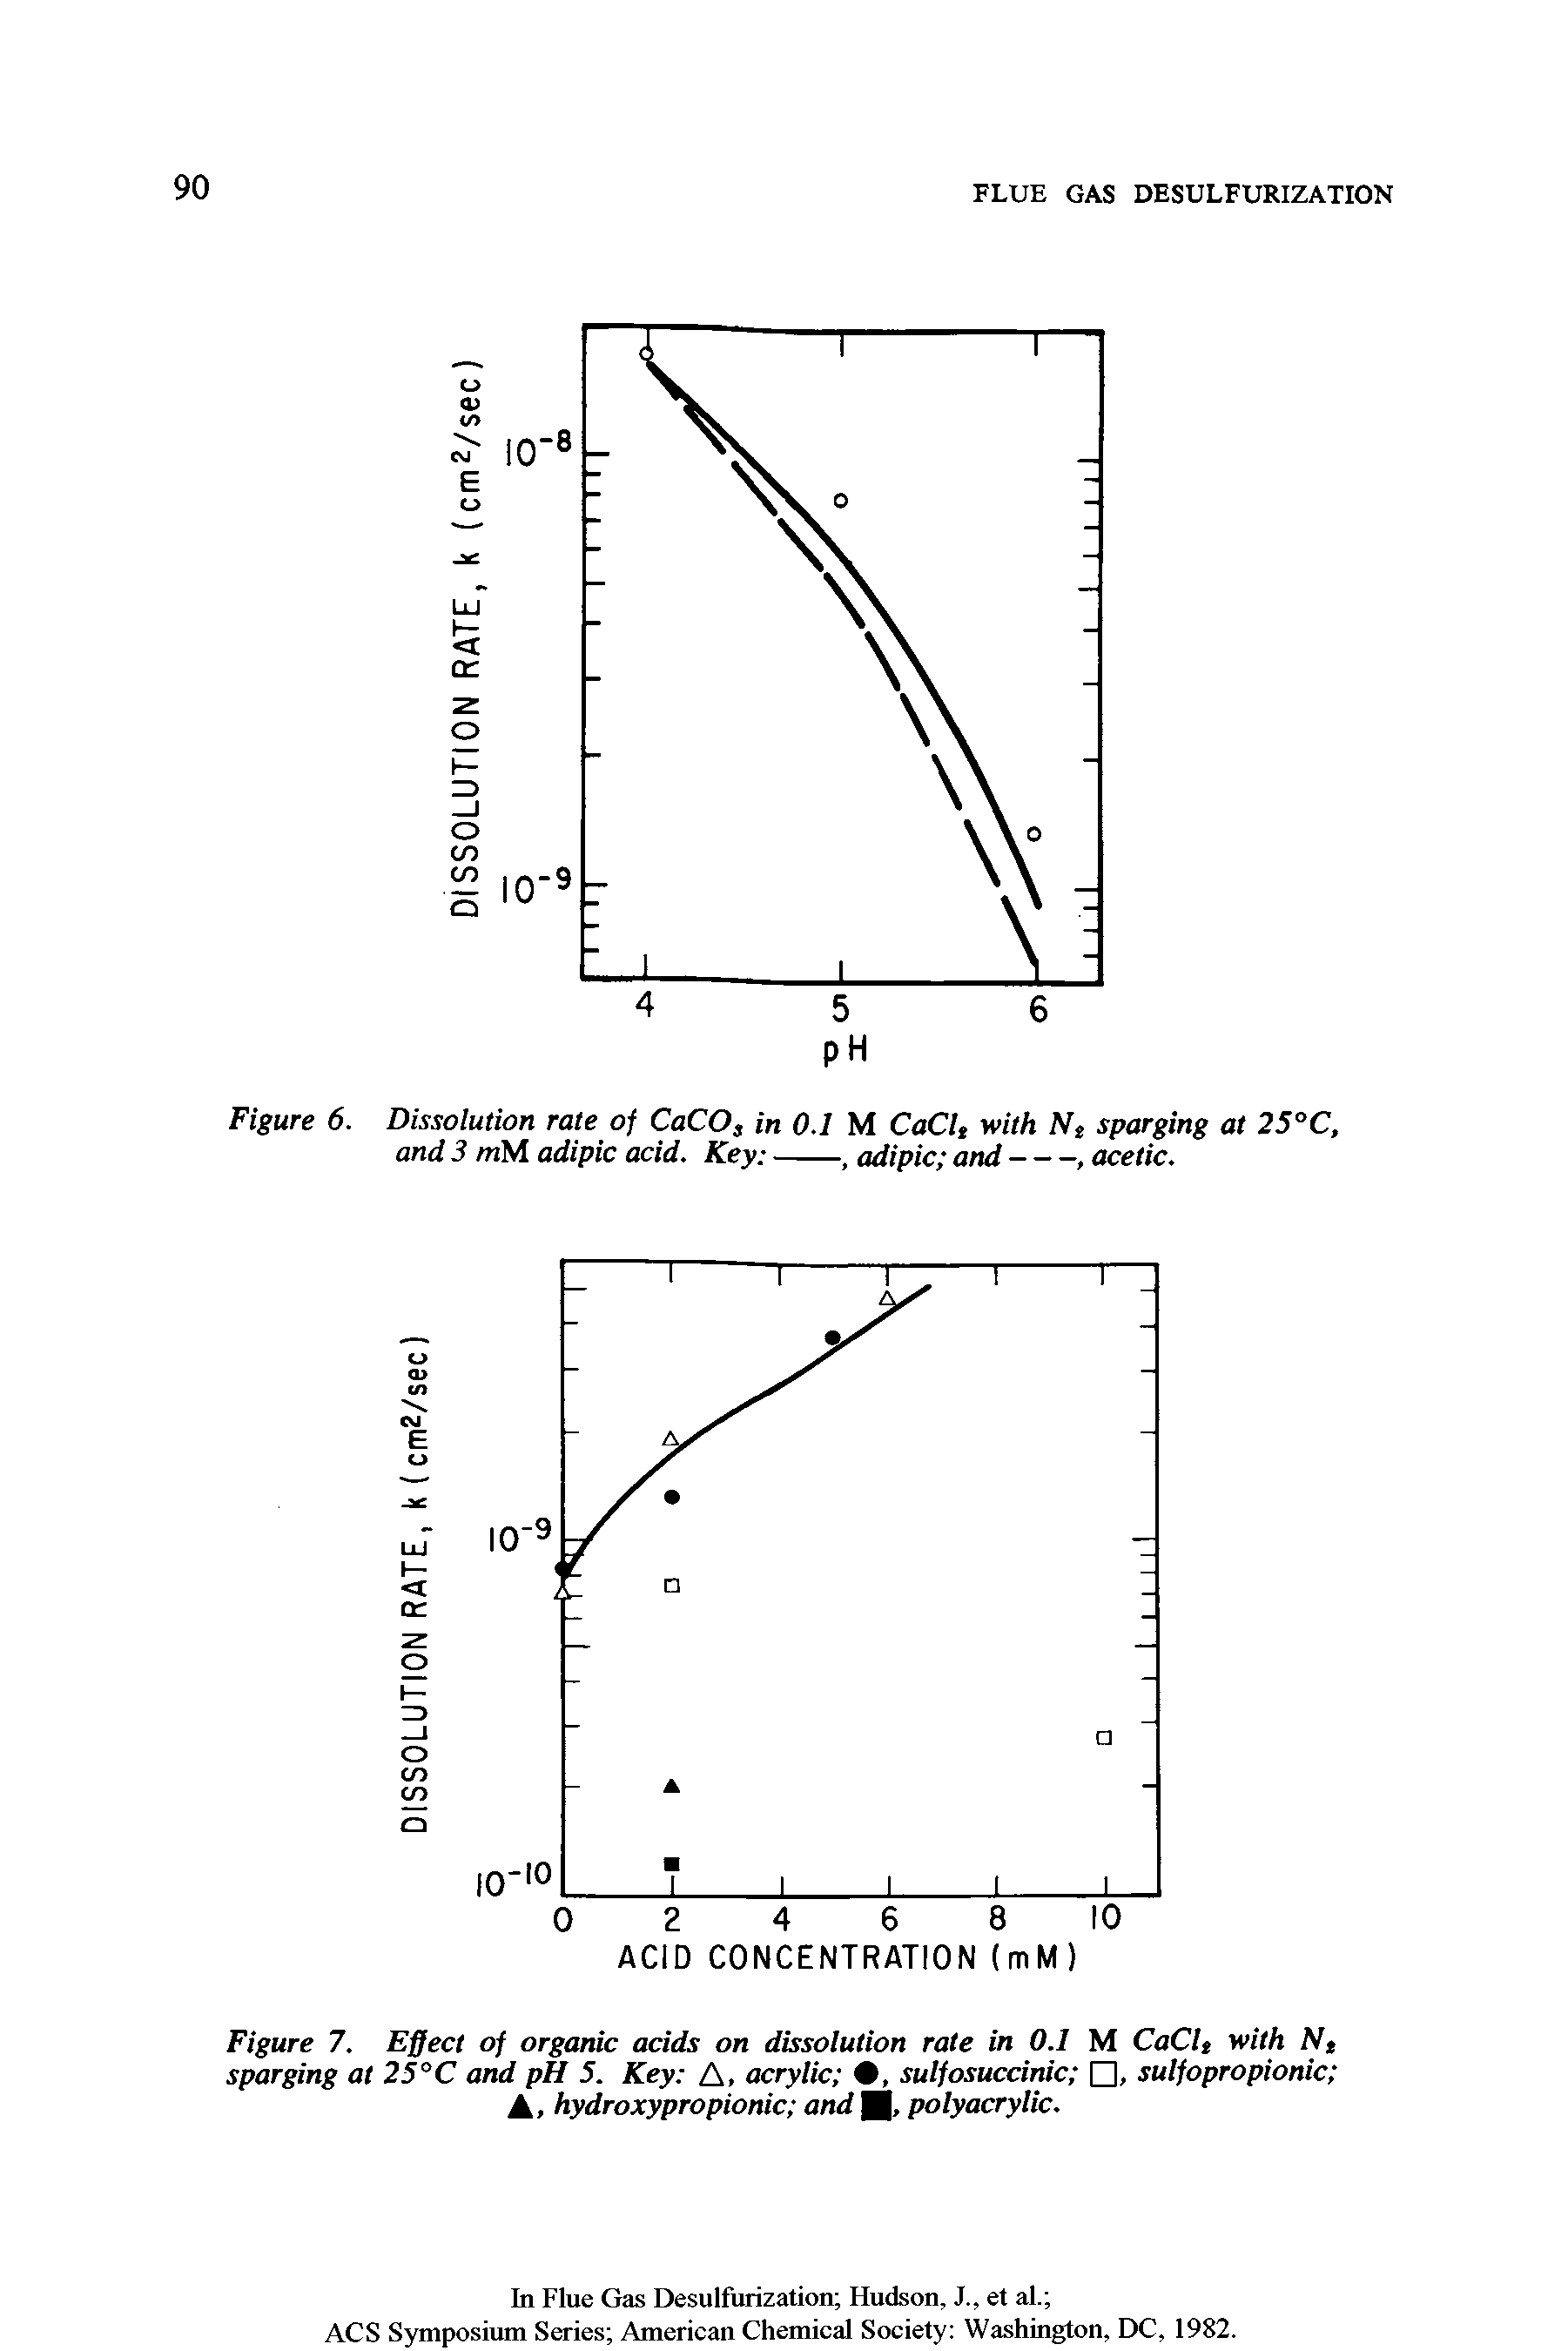 Figure 7. Effect of organic acids on dissolution rate in 0.1 M CaClt with Nt sparging at 25°C and pH 5. Key A, acrylic , sulfosuccinic , sulfopropionic A, hydroxypropionic and polyacrylic.